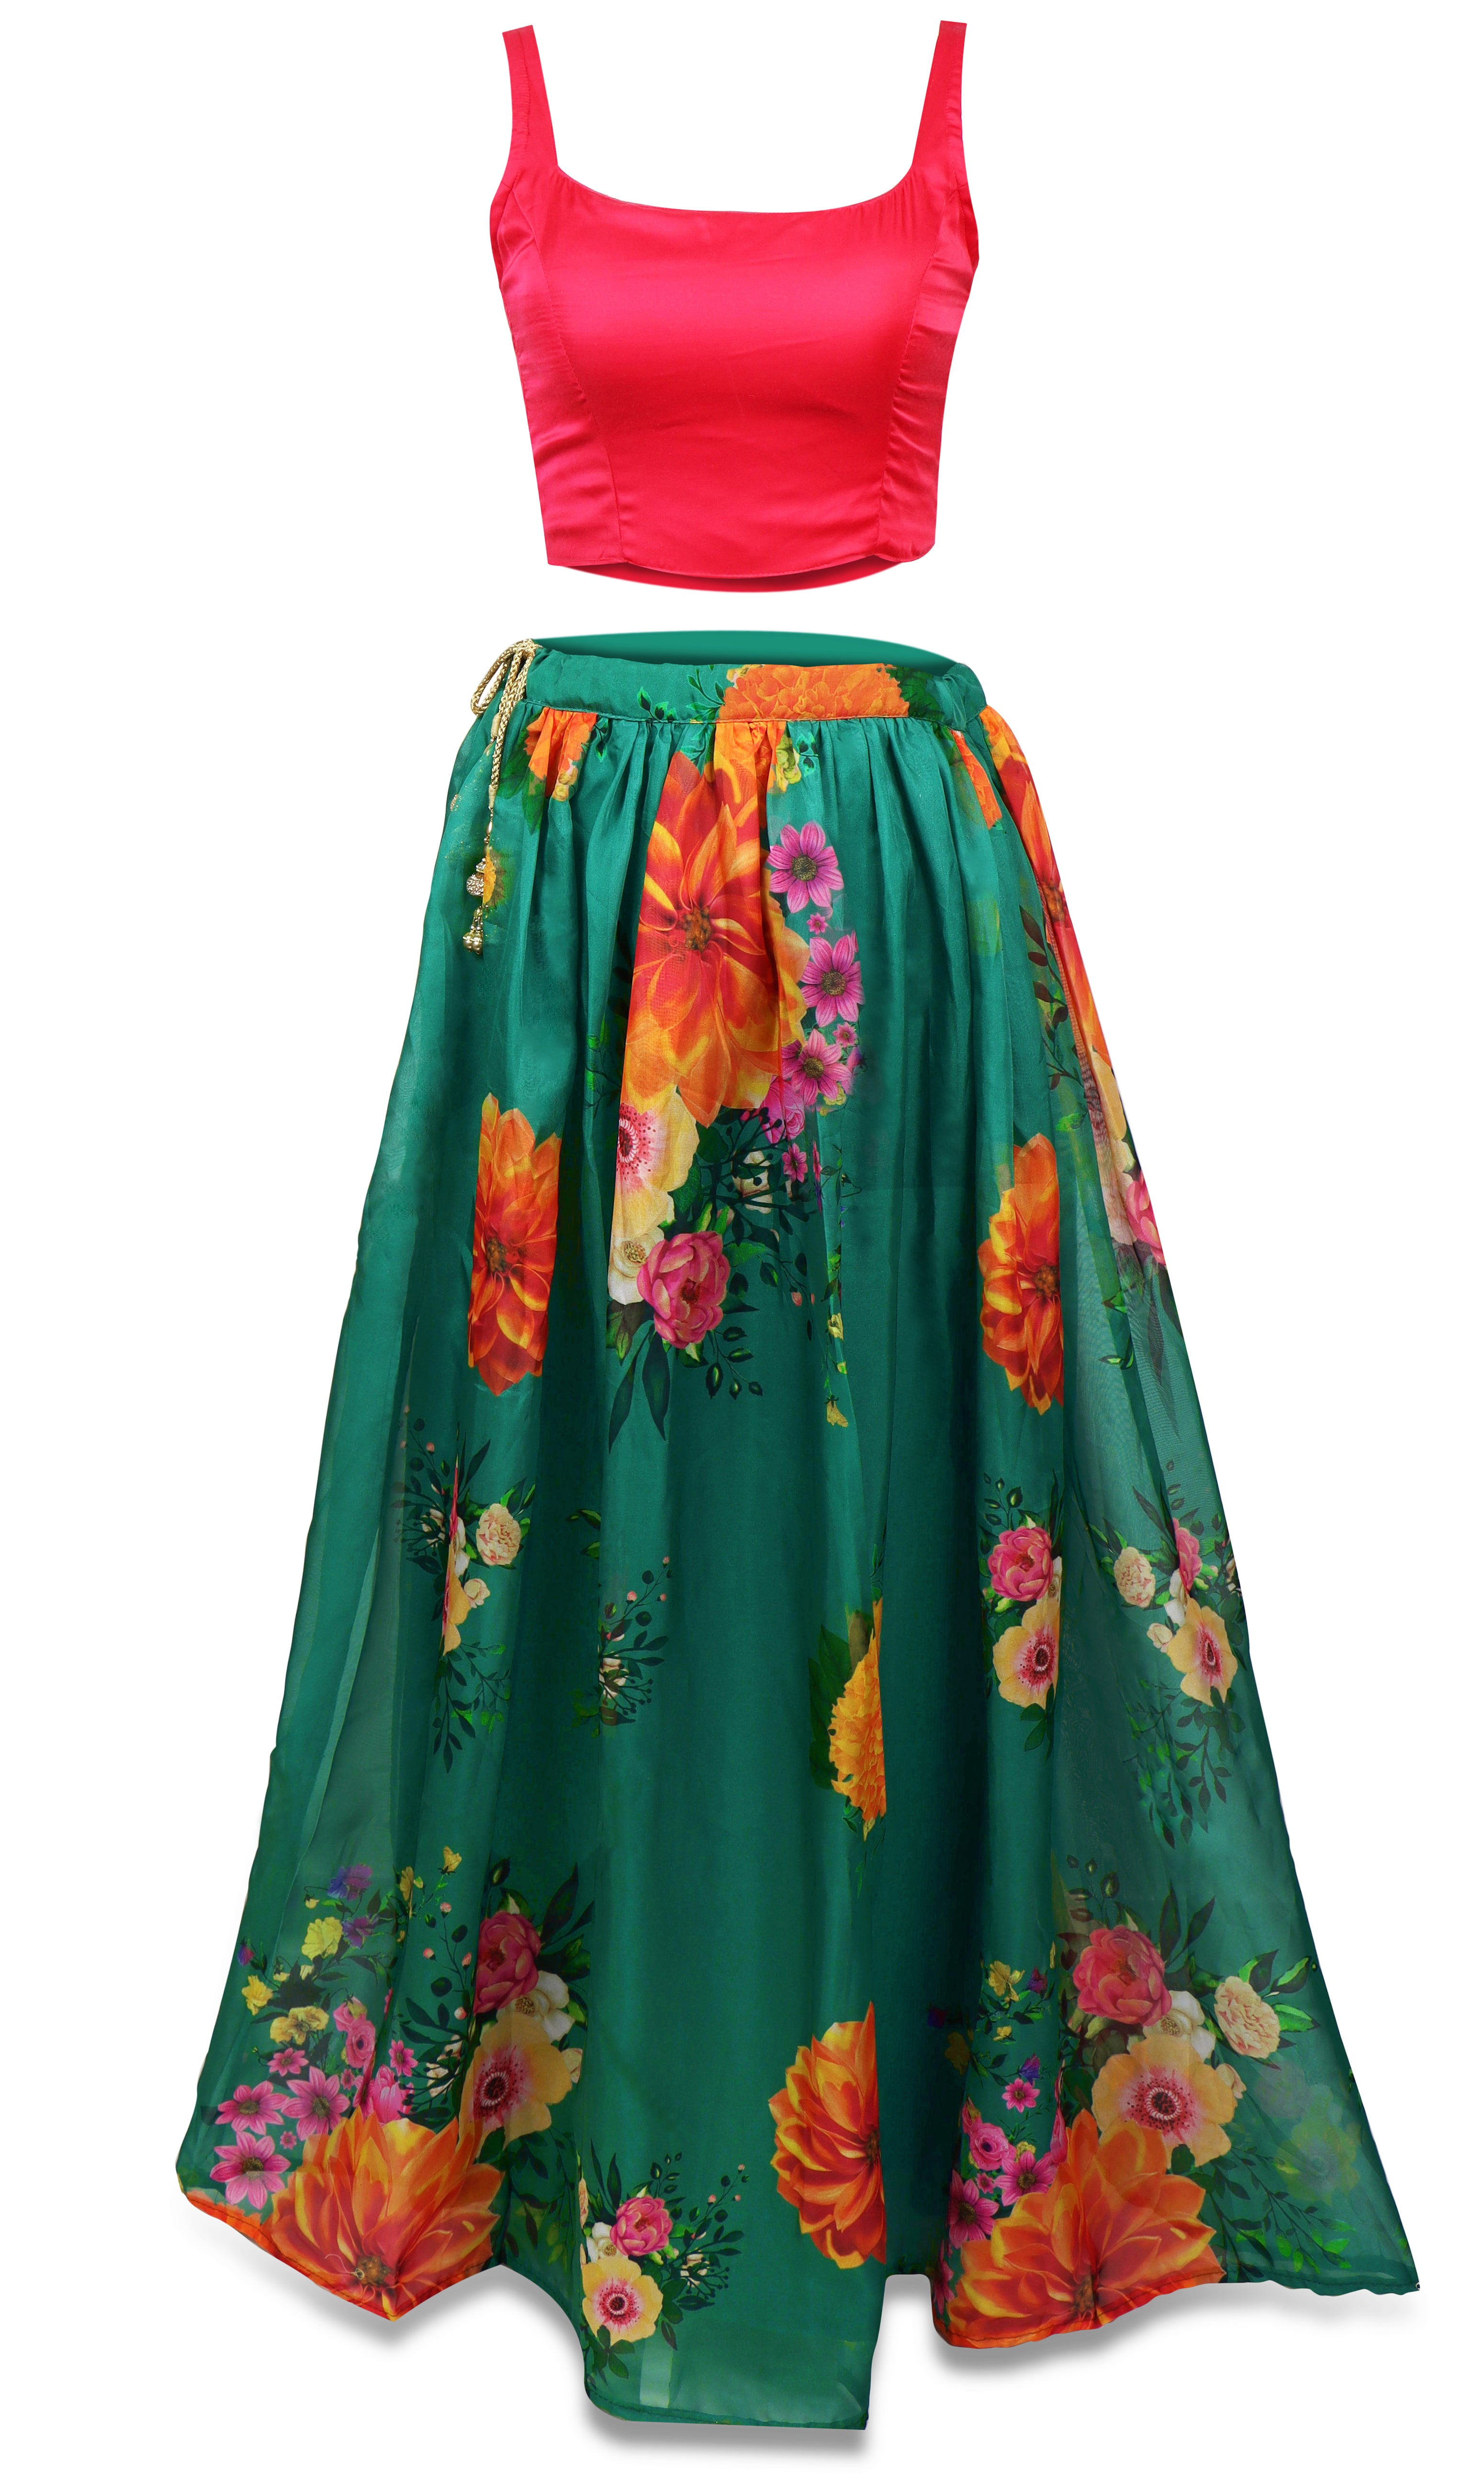 Wildflower Lehenga with Red color blouse prefer and what your size is Place your order.